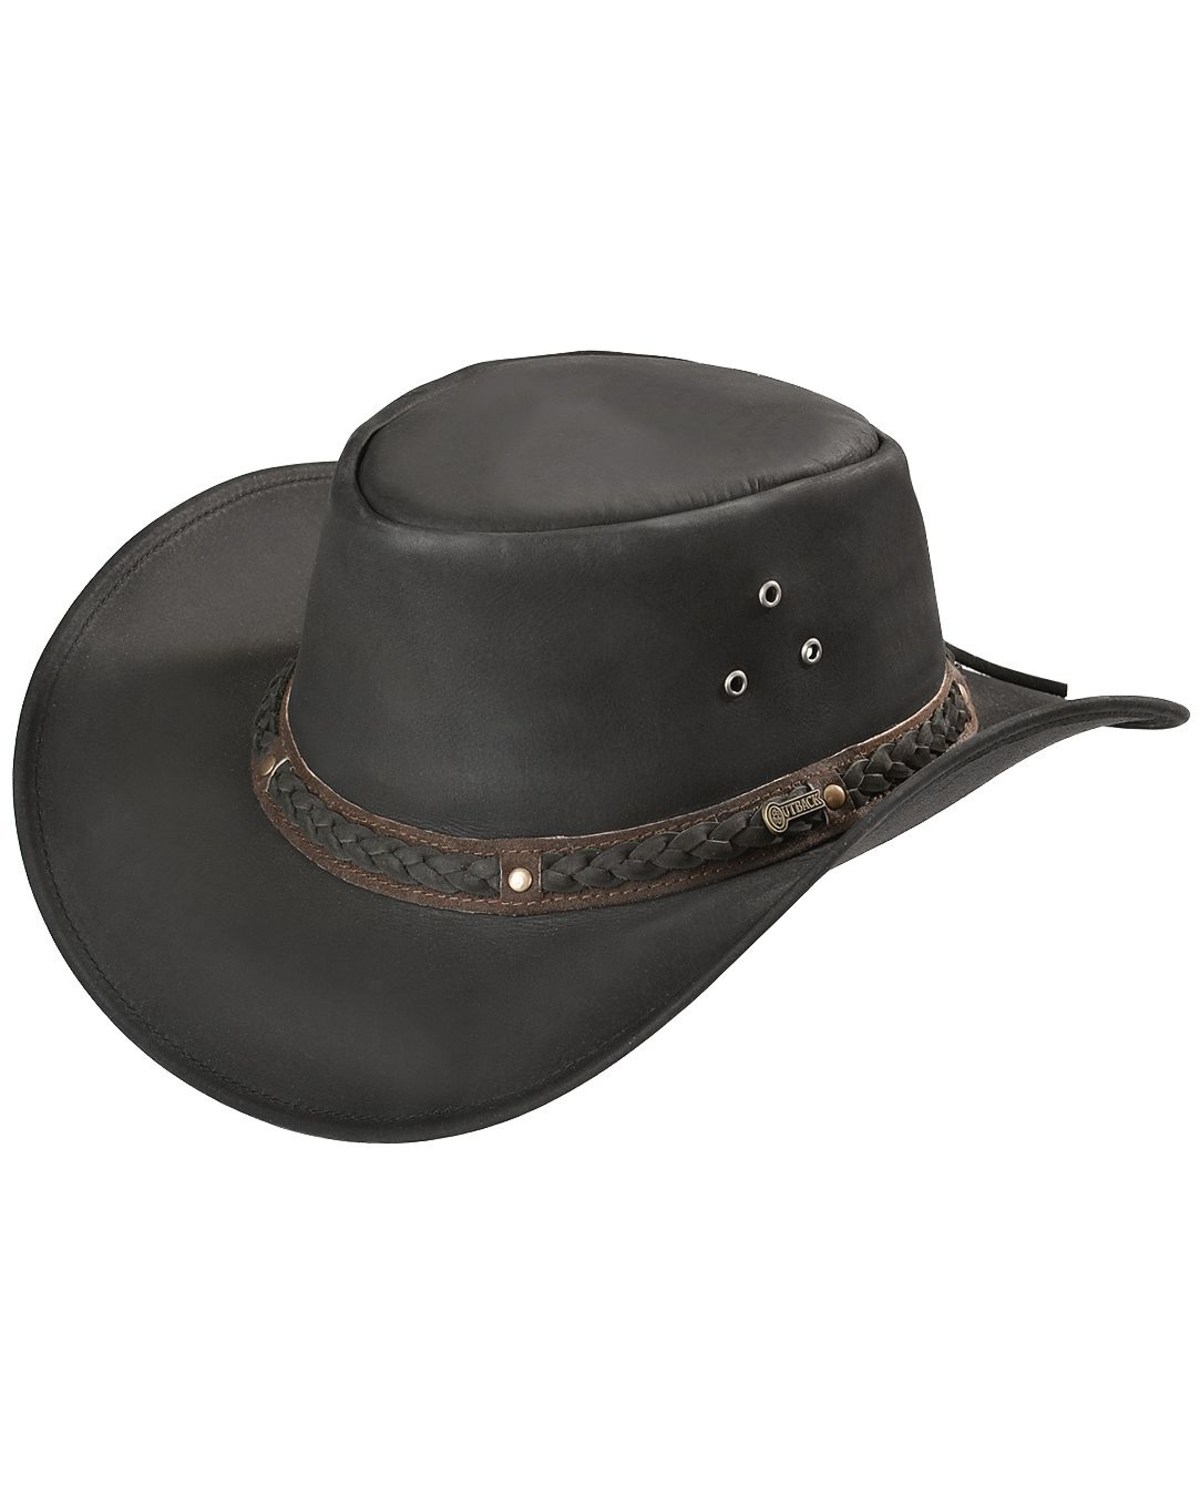 Outback Trading Co. Wagga UPF 50 Sun Protection Leather Hat